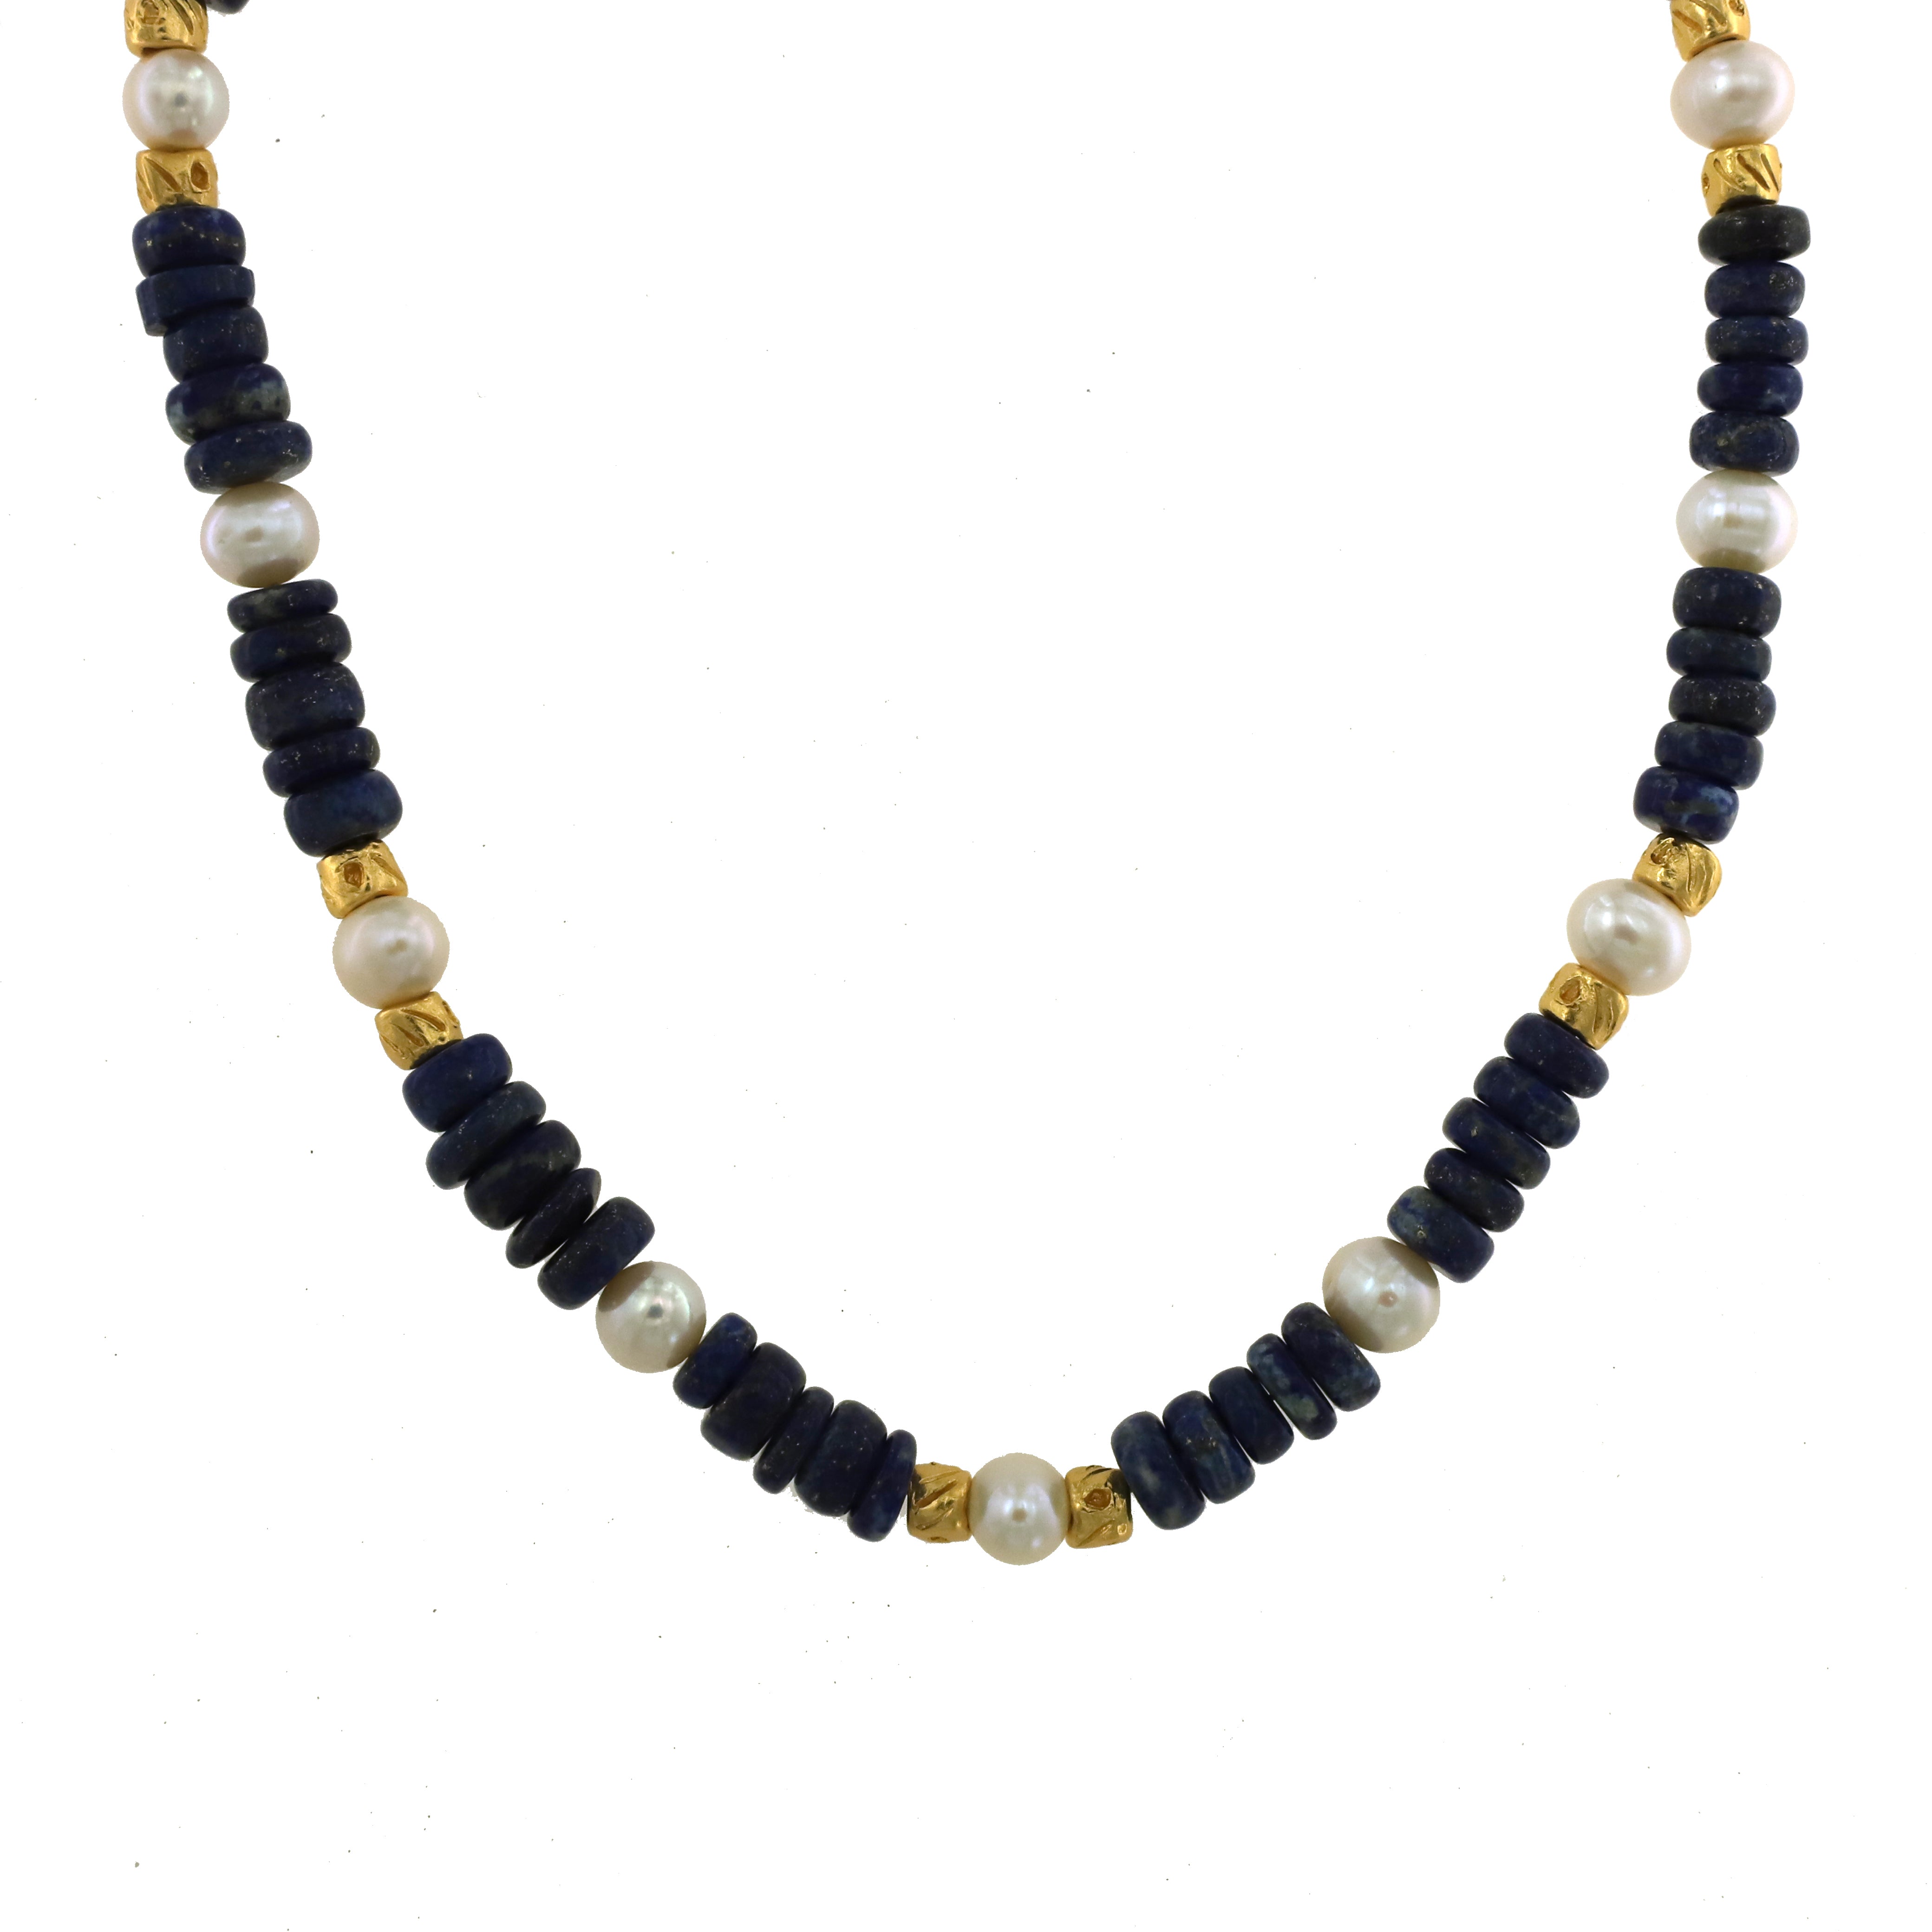 CO.NK.107 Necklace – 18K Gold Plated